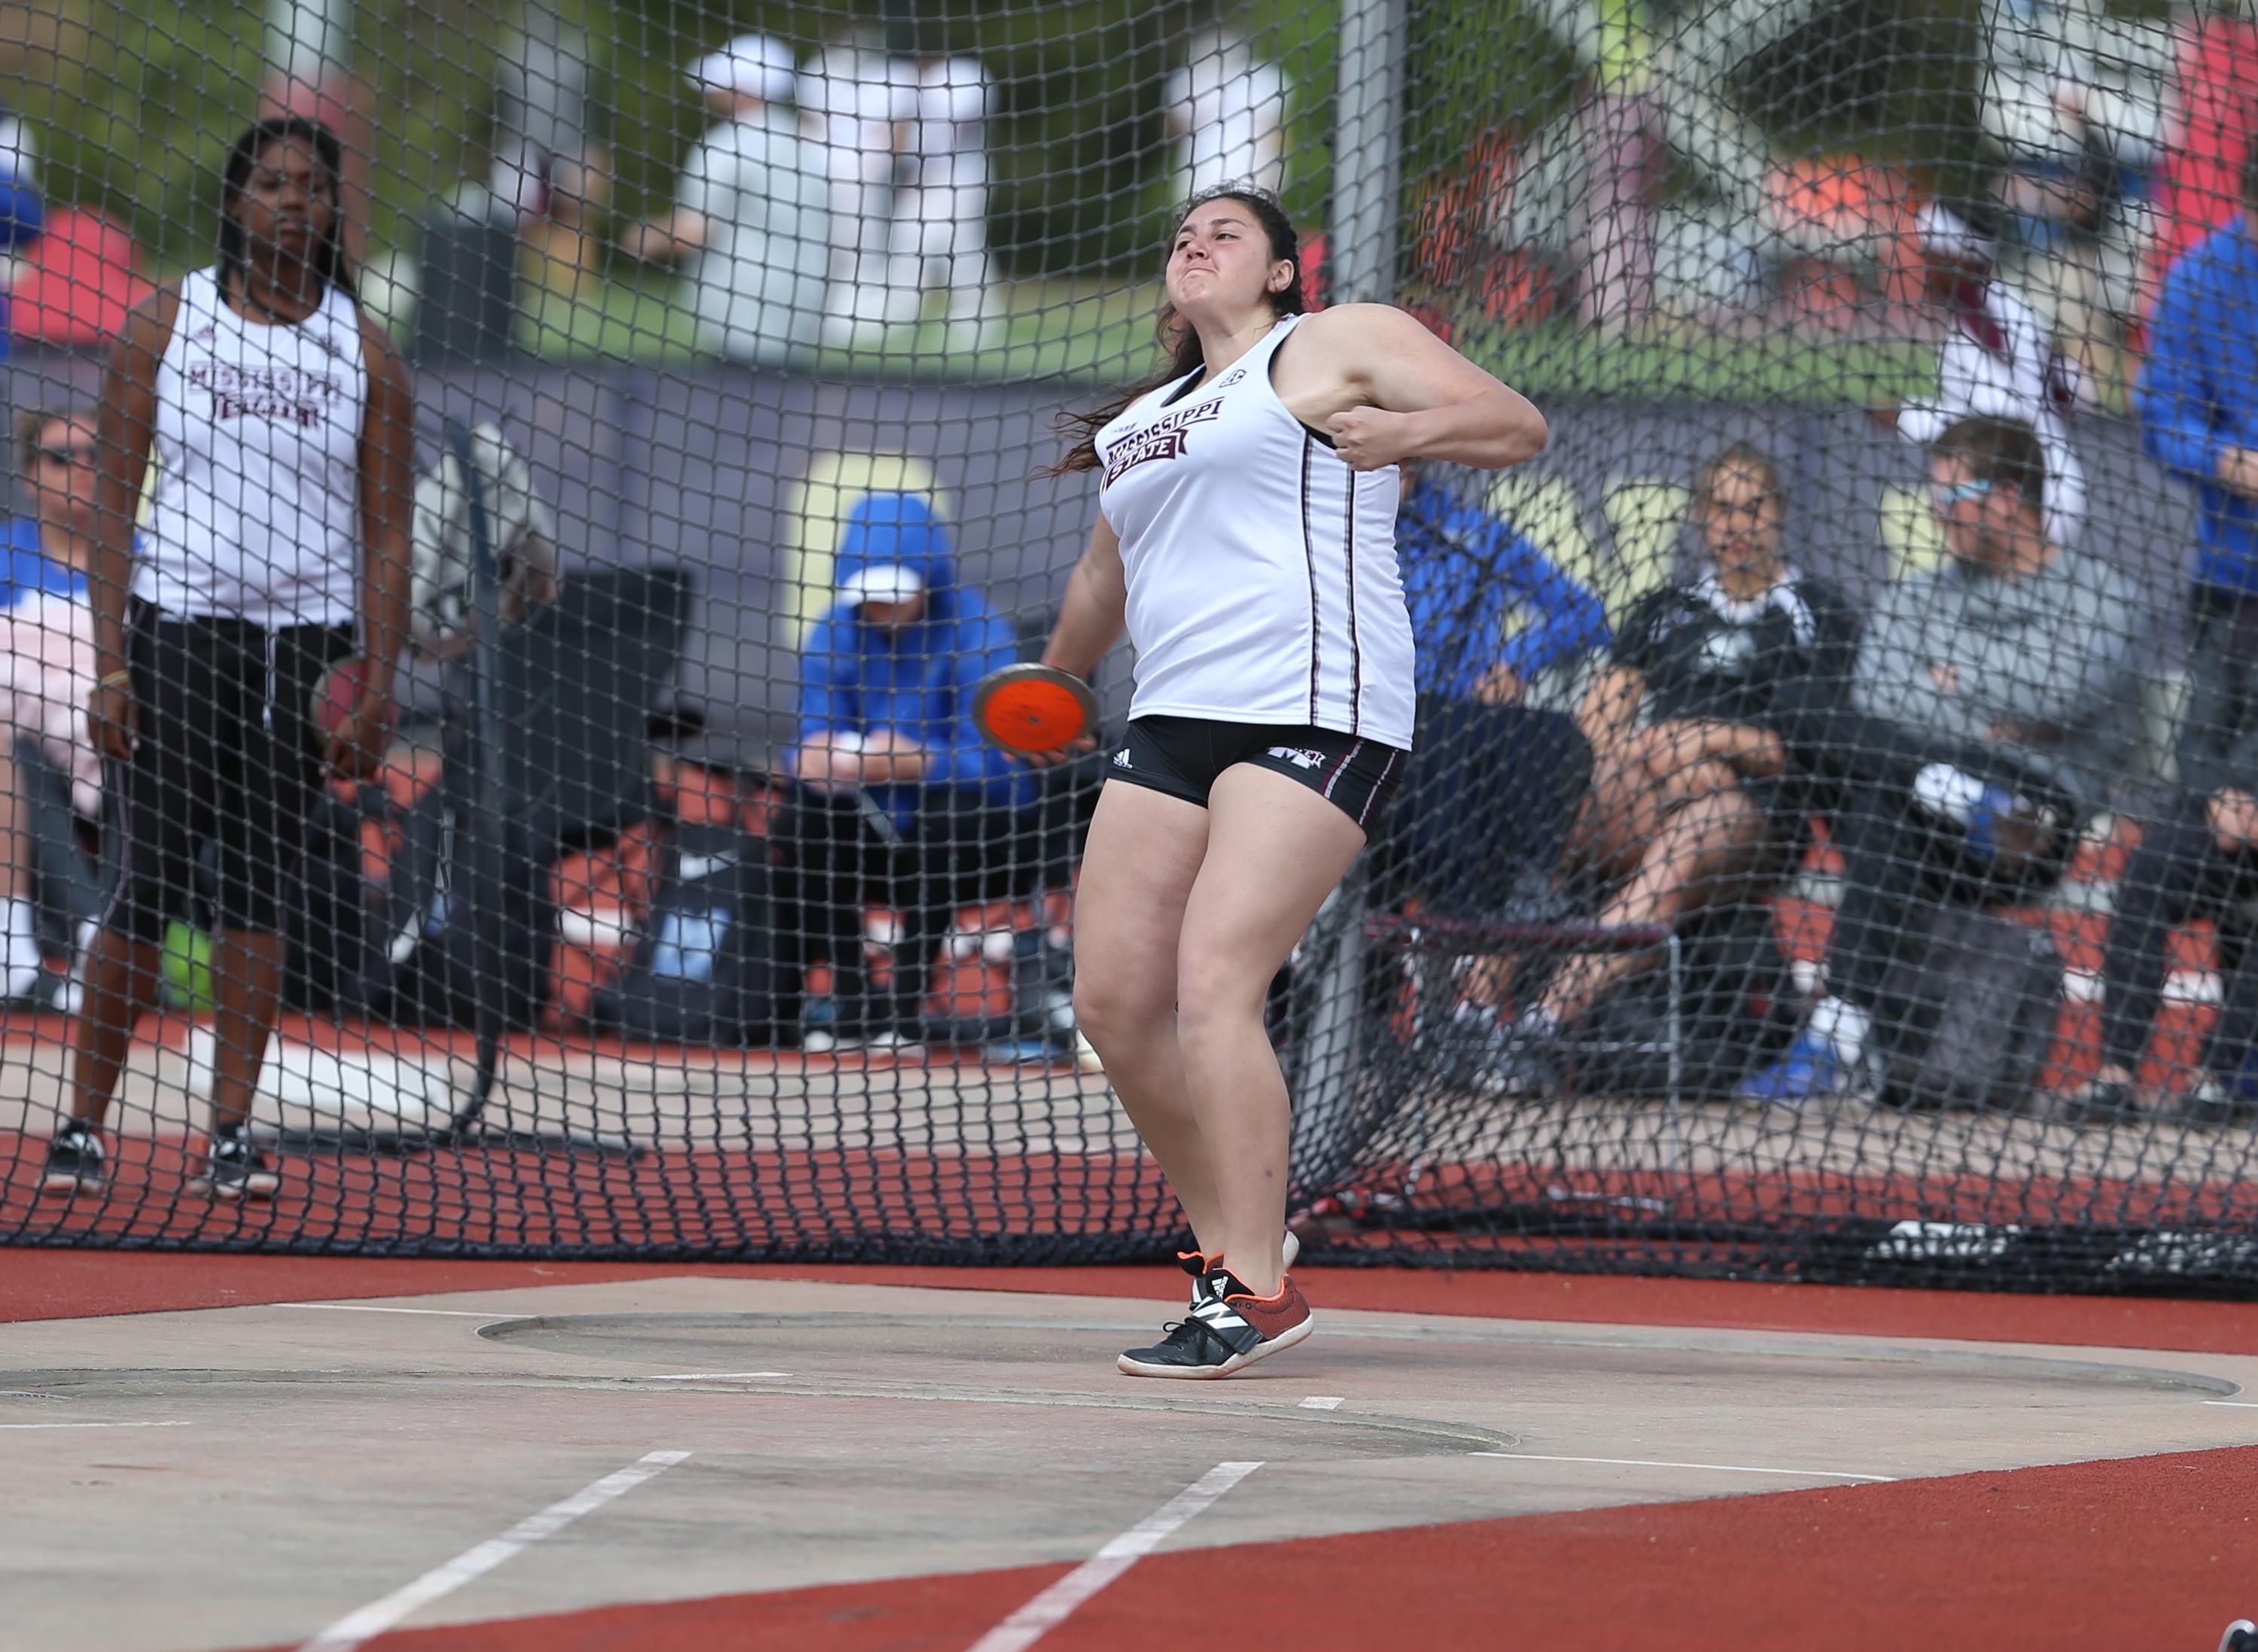 Viveros Sets School Record in Shot Put at Music City Challenge